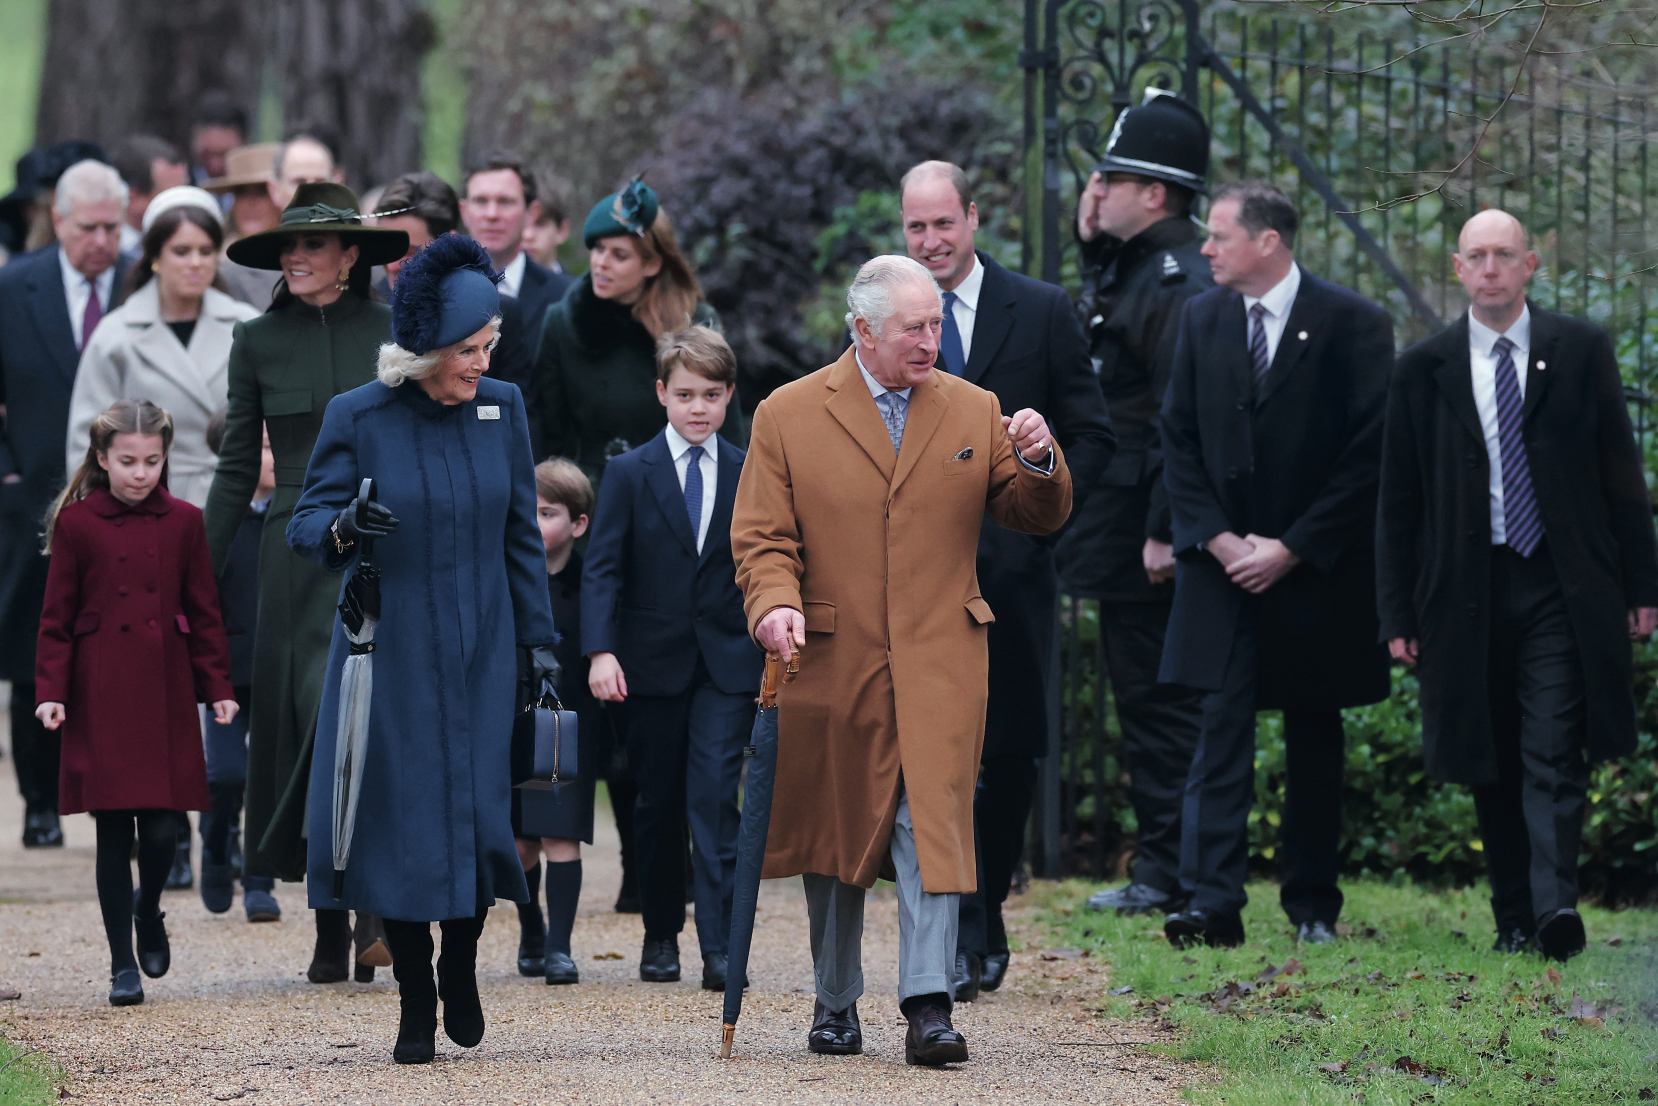 King Charles III with his family